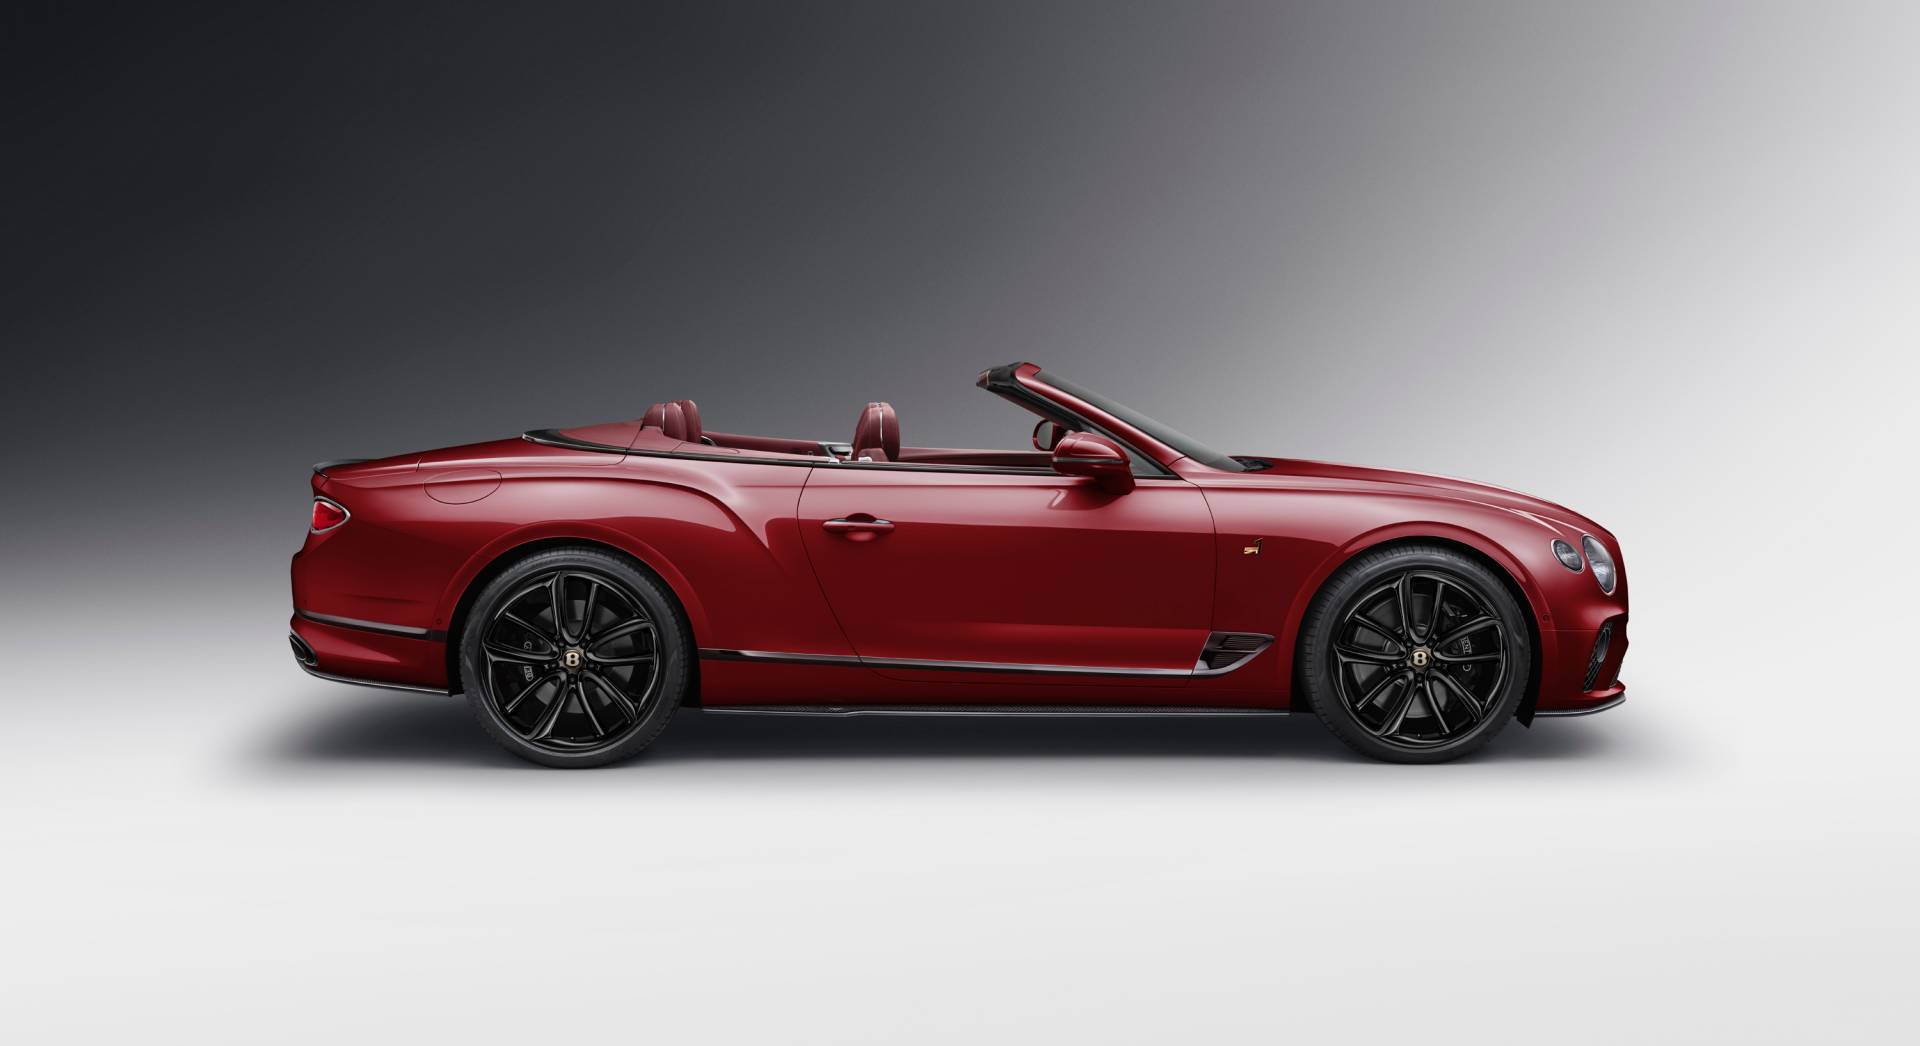 2017 - [Bentley] Continental GT - Page 7 97cae6c1-bentley-continental-gt-convertible-number-1-edition-by-mulliner-3